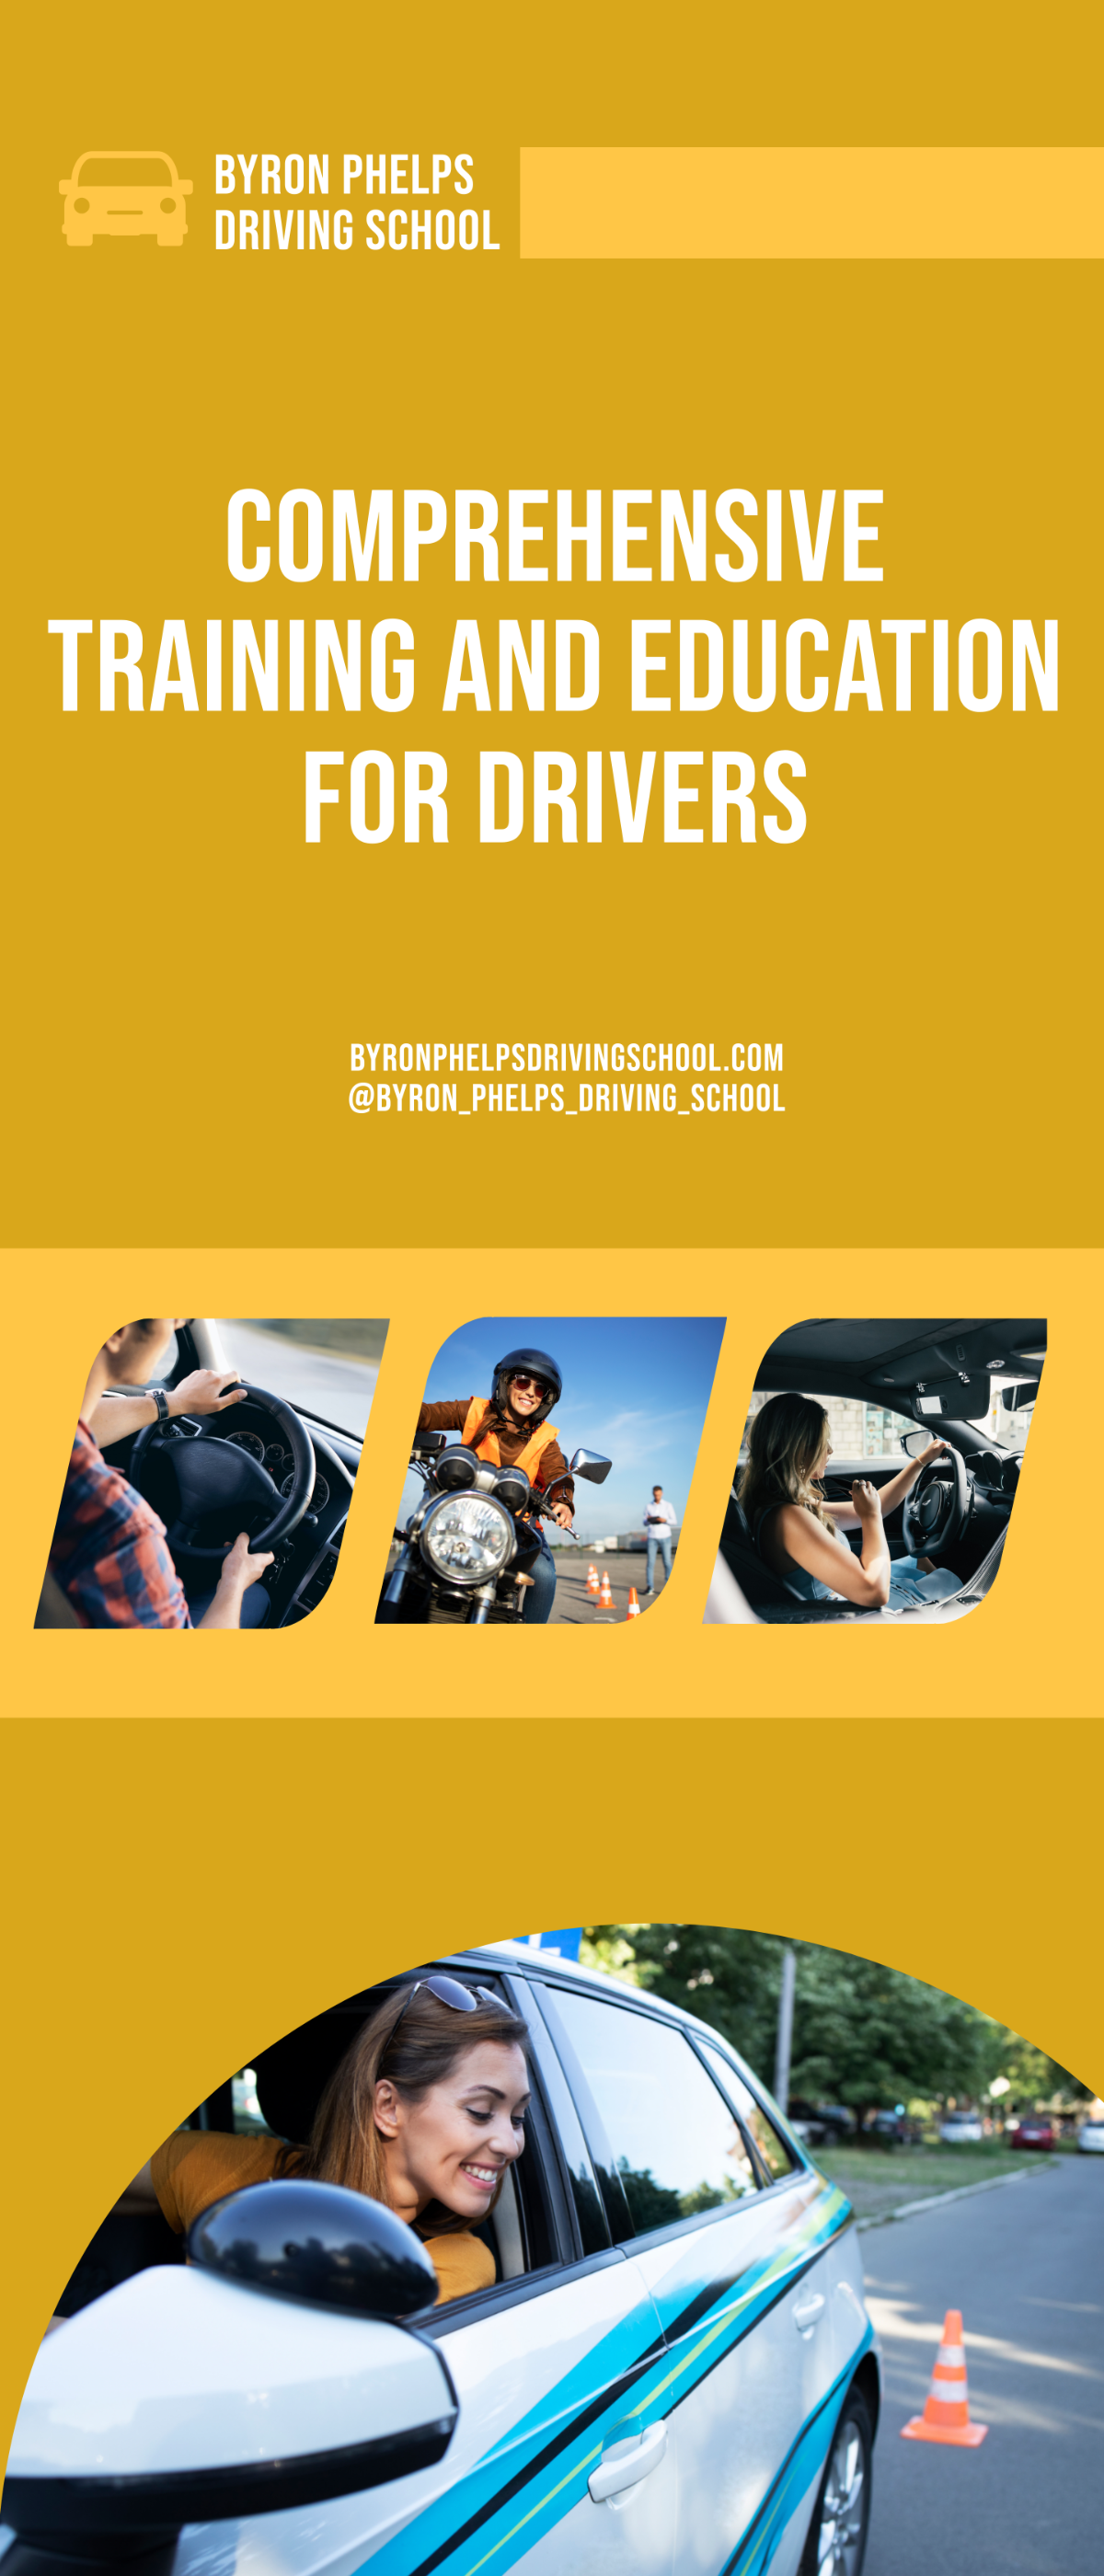 Driving School Roll Up Banner